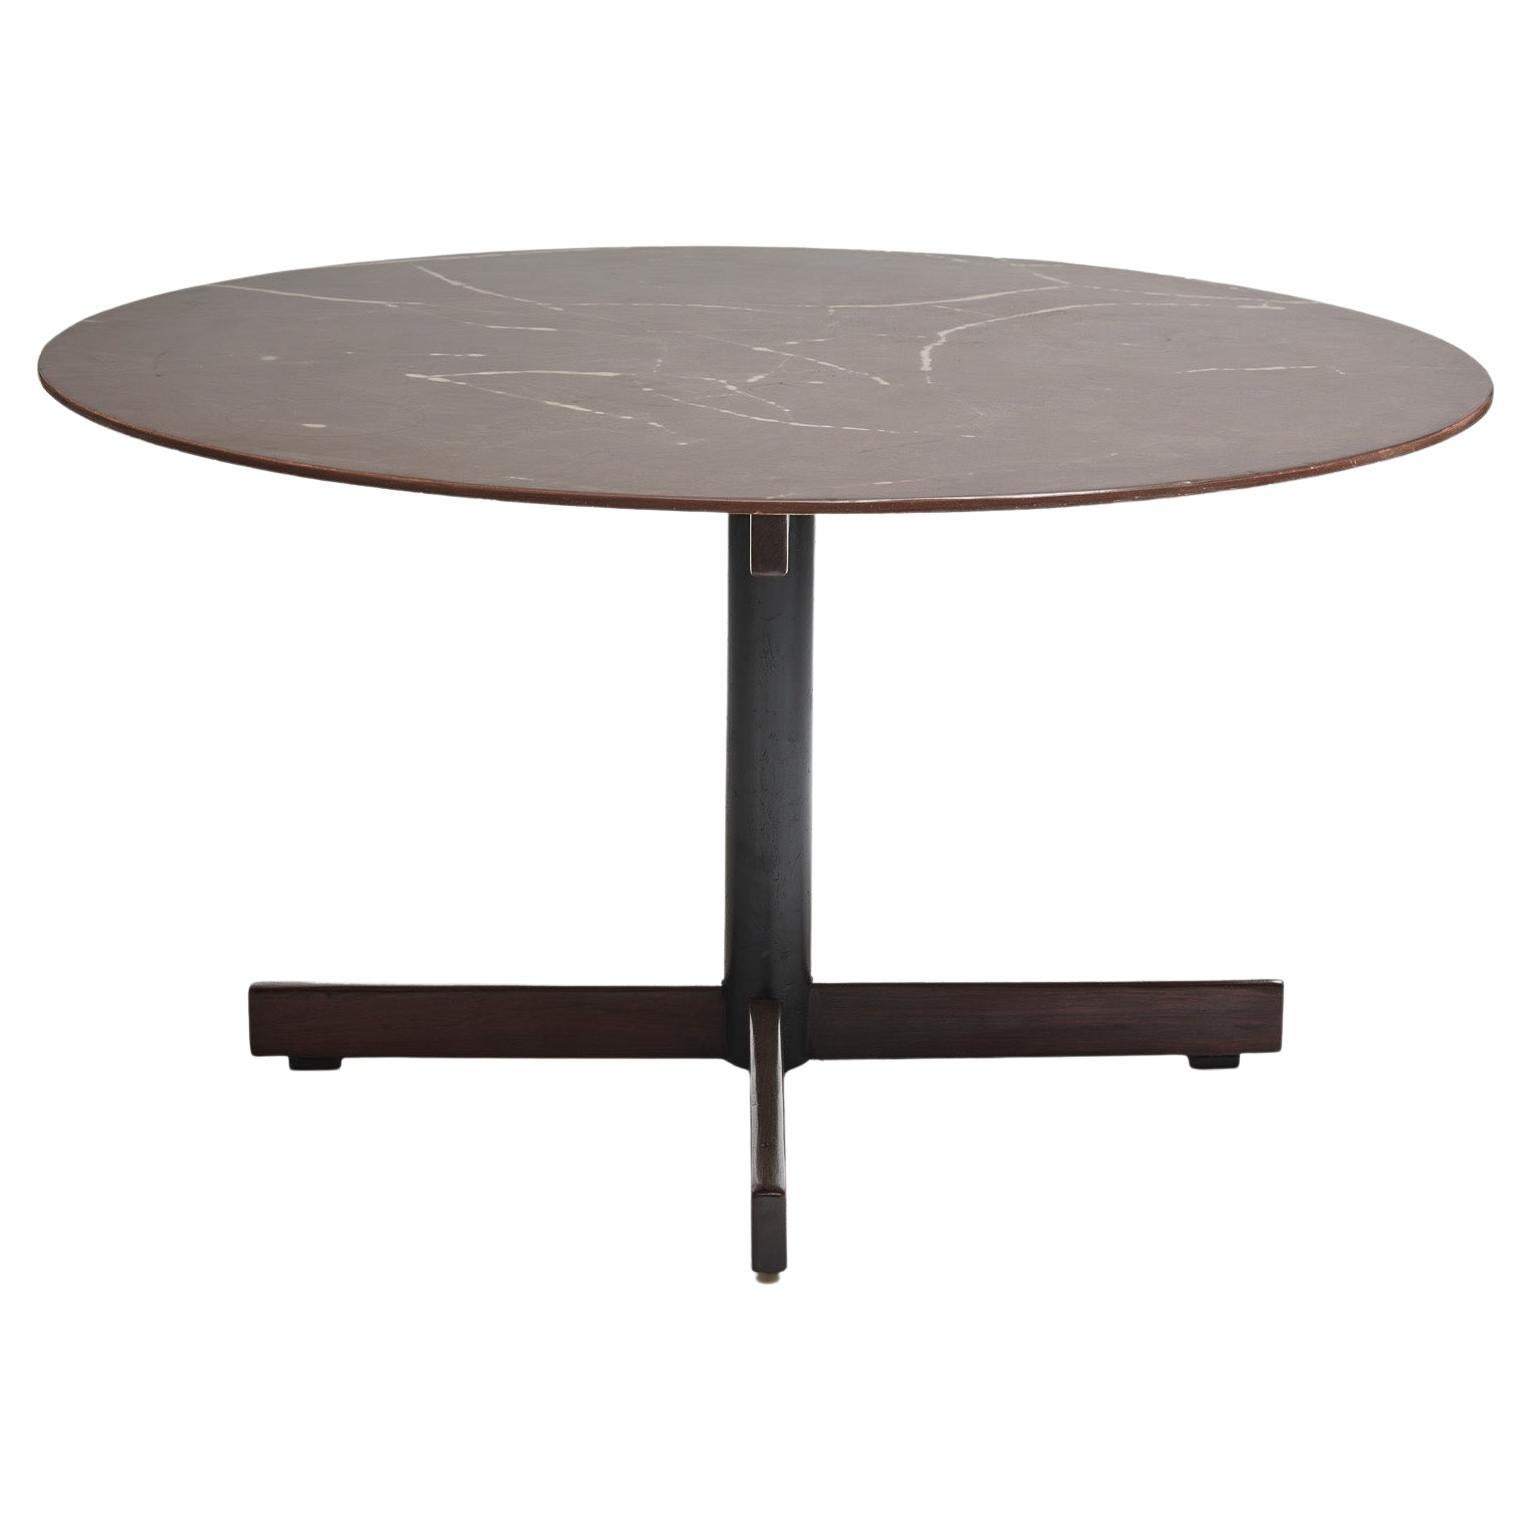 Available today, this midcentury modern Round Dining Table in Hardwood & Granite designed by Jorge Zalszupin, in the sixties is exquisite.

The table consists of a granite top and “X” shape base made of steel and Brazilian Rosewood, as known as